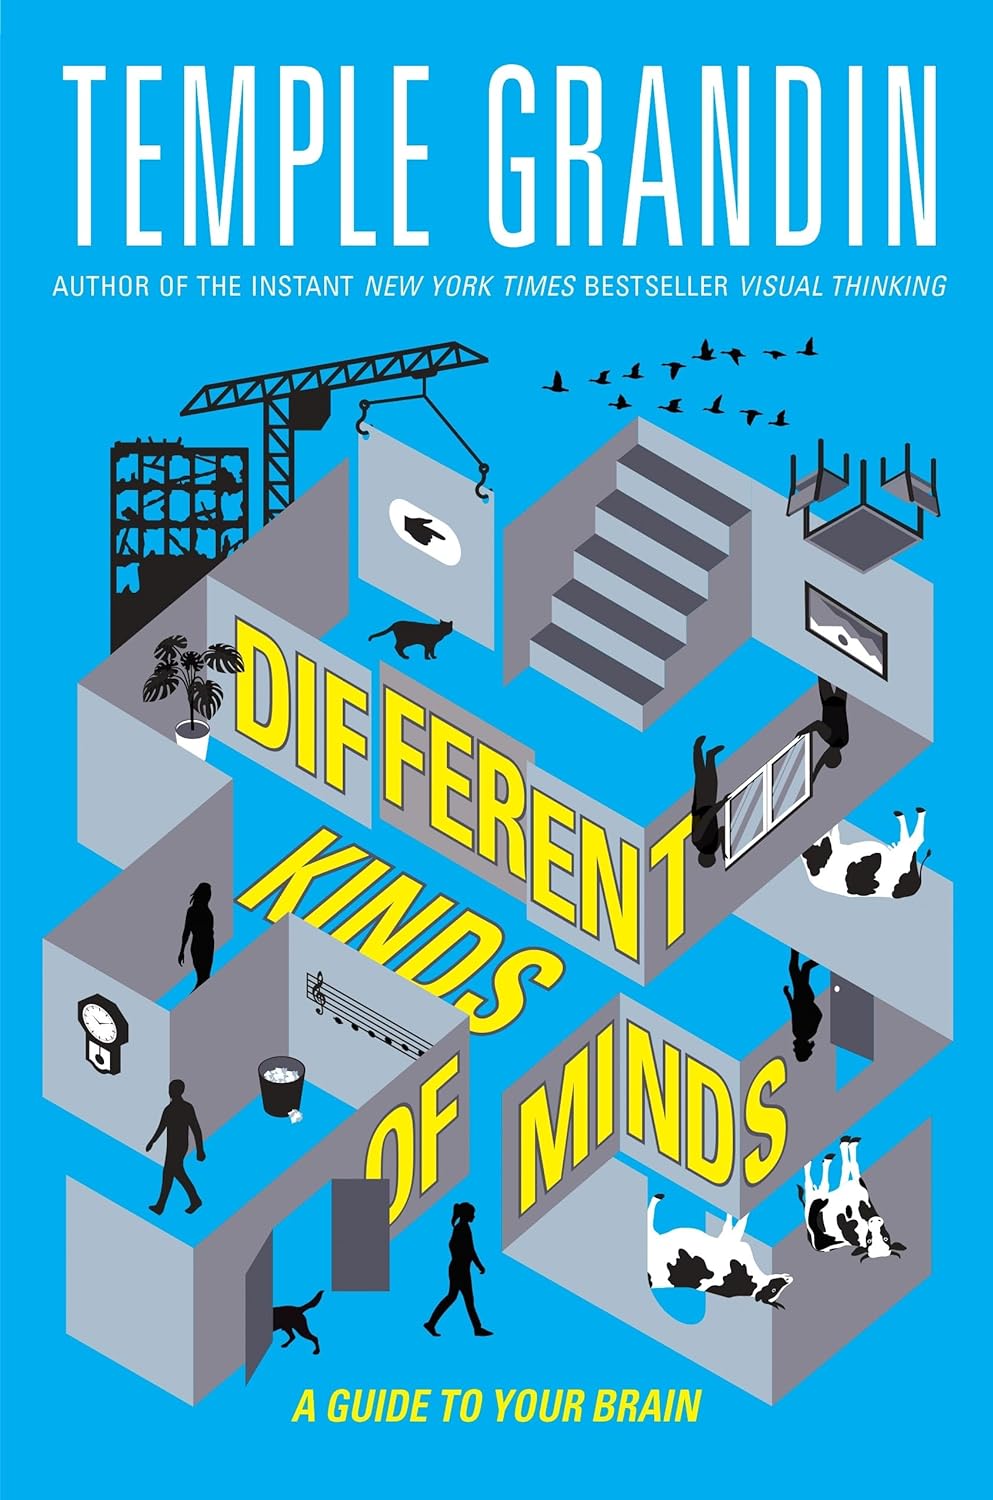 Different Kinds of Minds | Temple Grandin